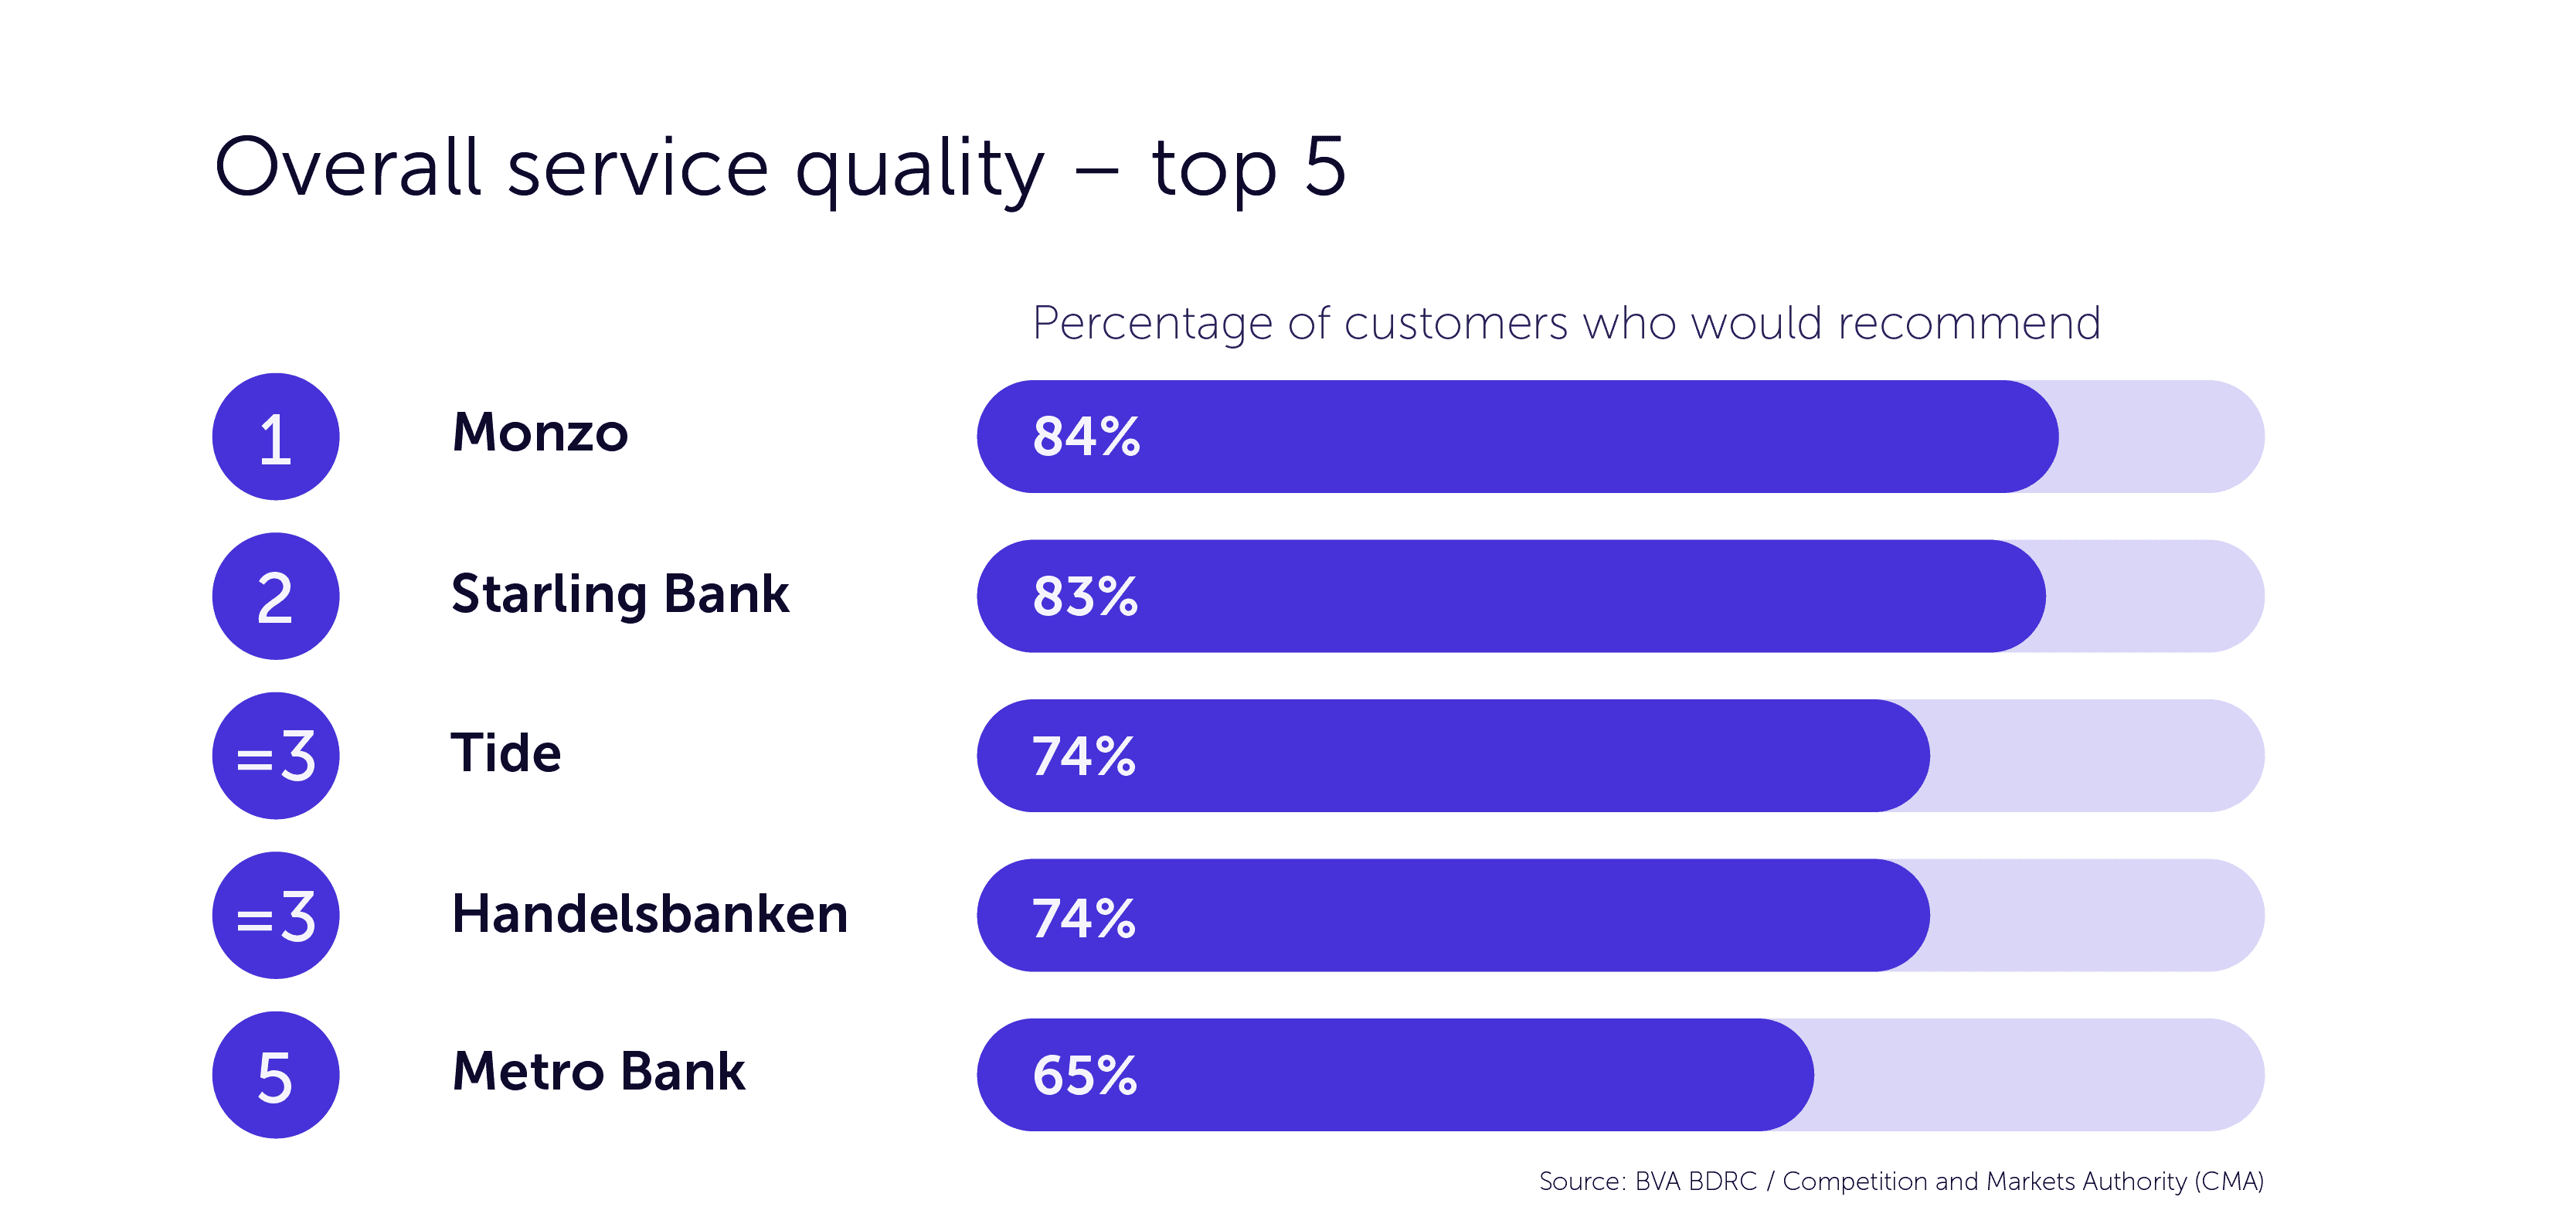 Top 5 business banks for overall service quality